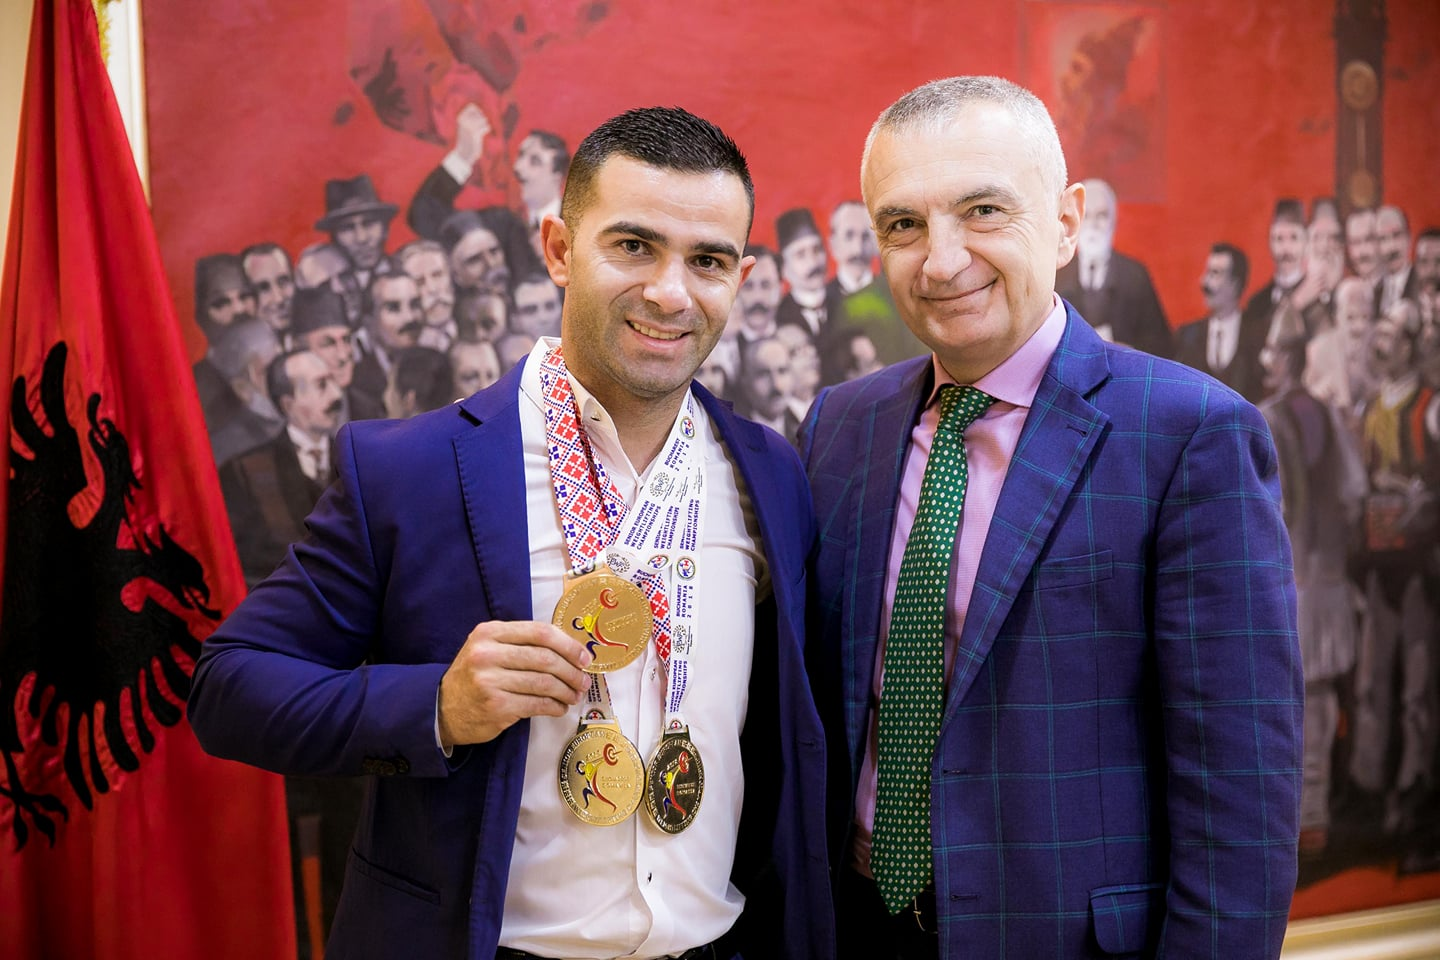 Furious weightlifters turn to President of Albania after being banned by their own Olympic Committee